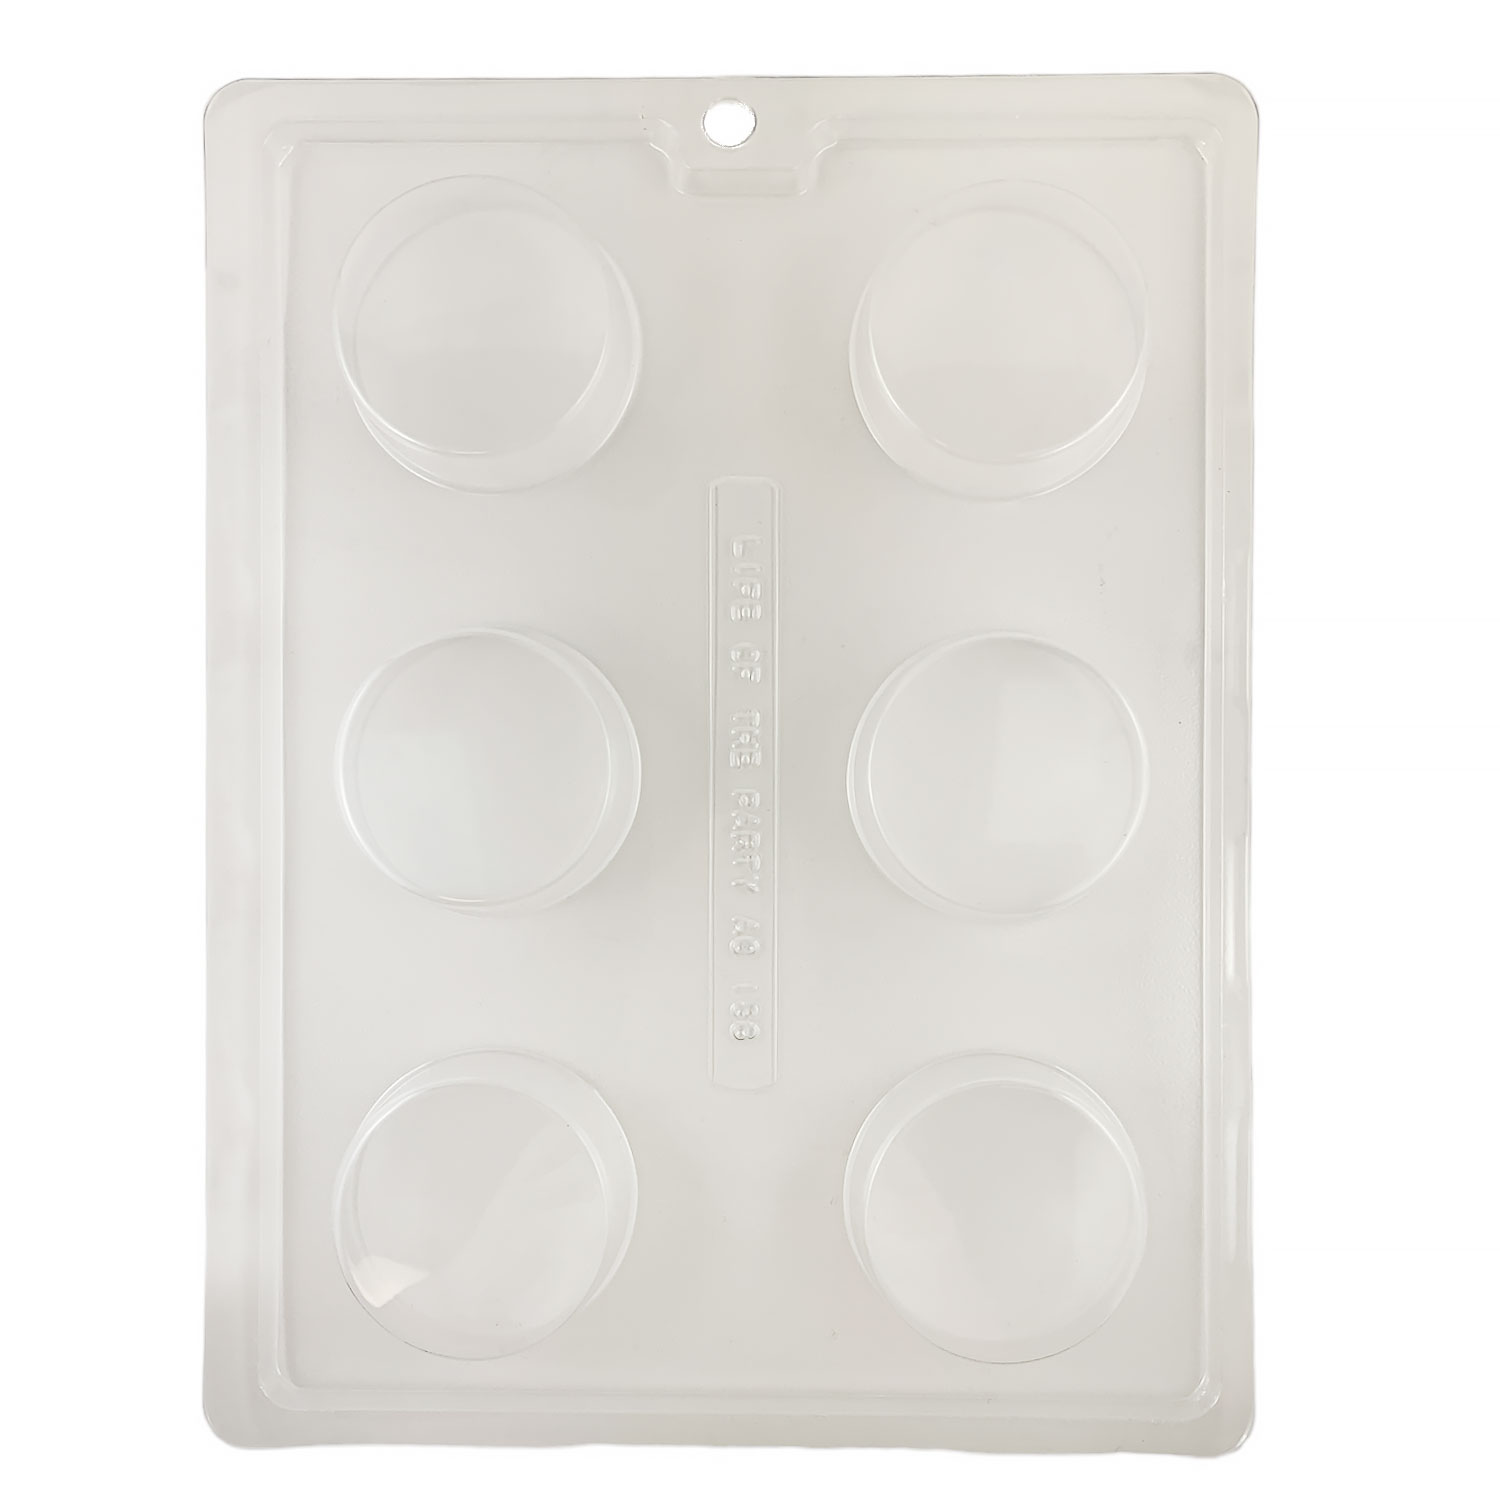 Wilton Silicone Baking and Candy Mold-Winter Snowflake, 6 Cavity